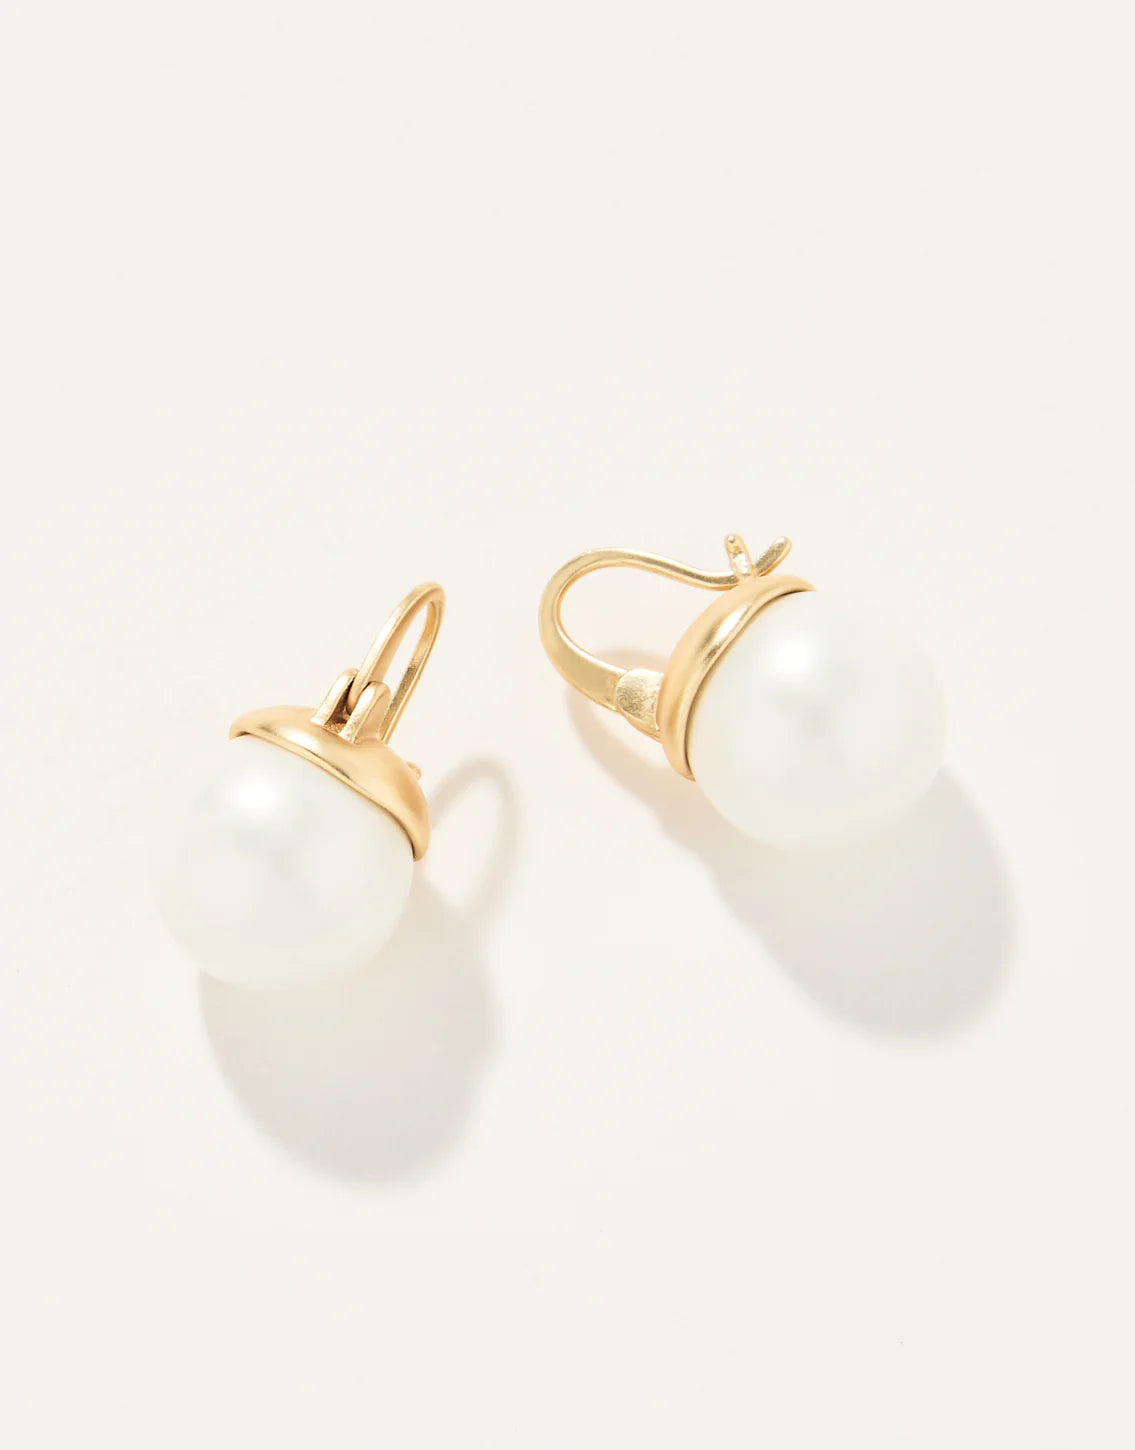 Spartina 449 Appoline Earrings pearl and gold 